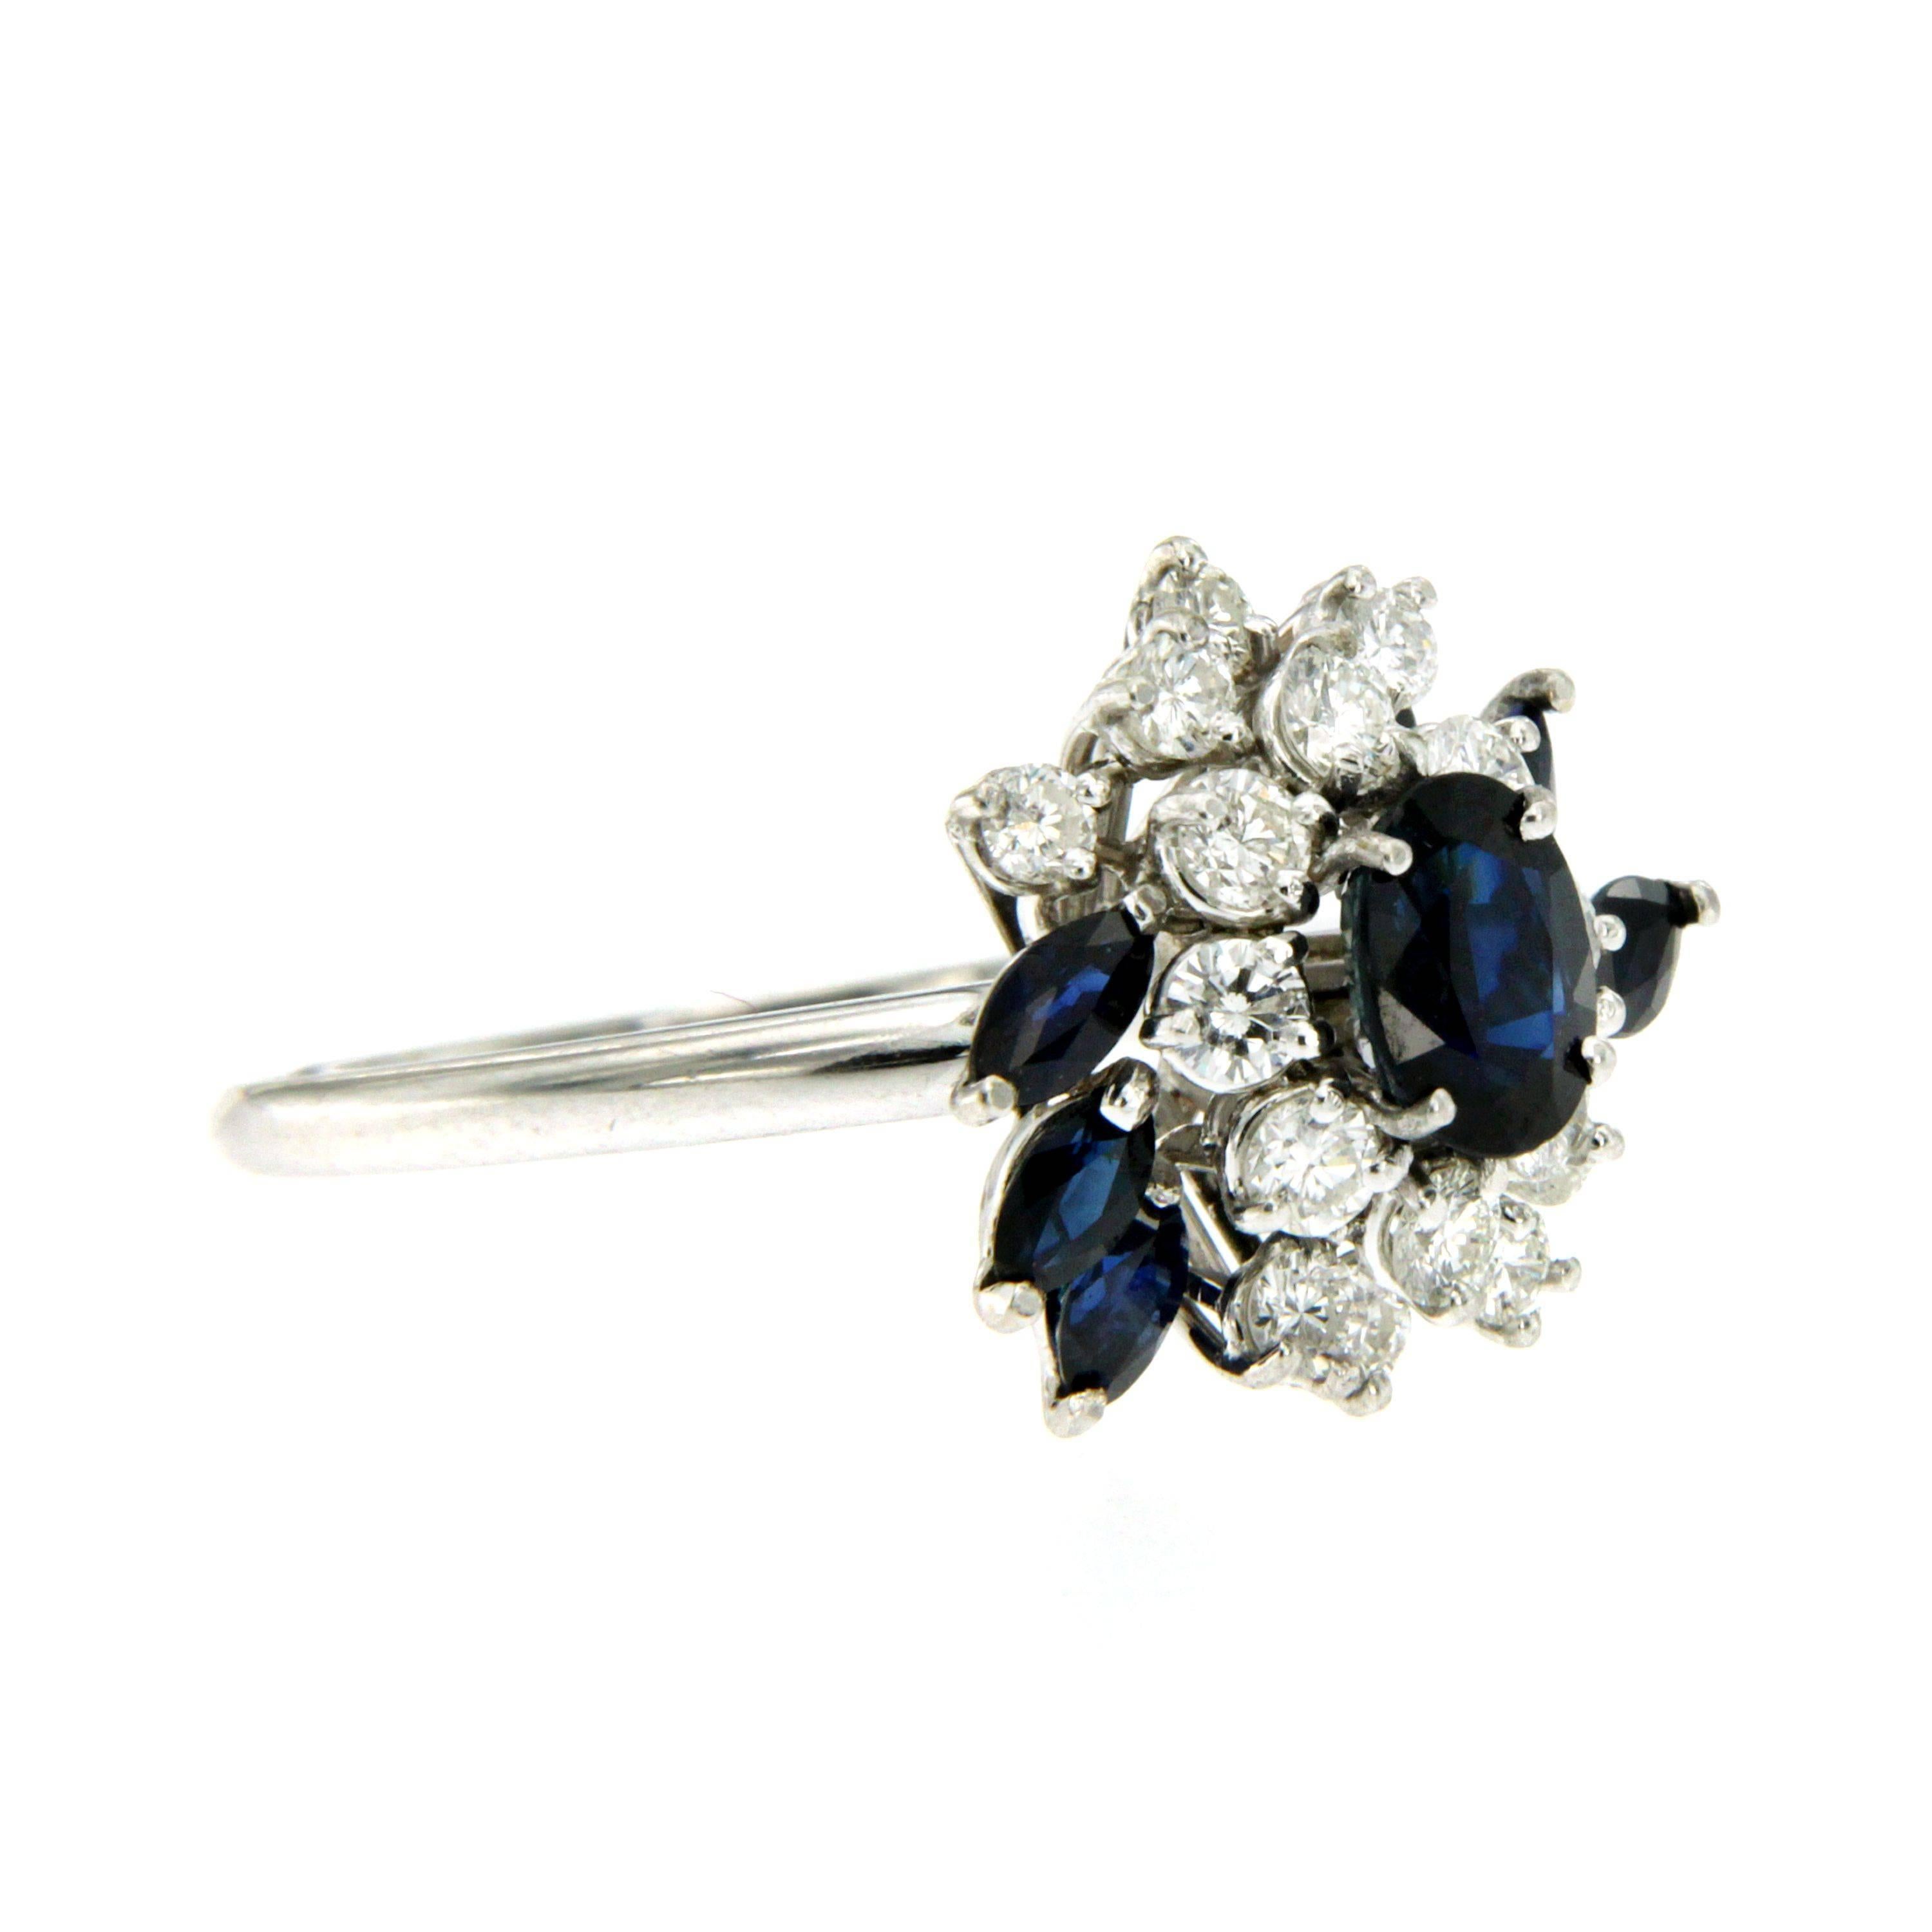 A beautiful made and timeless Sapphire Diamond cluster ring set in 18k white gold. 
The ring features a central Deep Blue Australian Oval cut Sapphire of 1.20 carat, surrounded by 0,70 carat of round Brilliant cut Diamond graded colorless Vvs